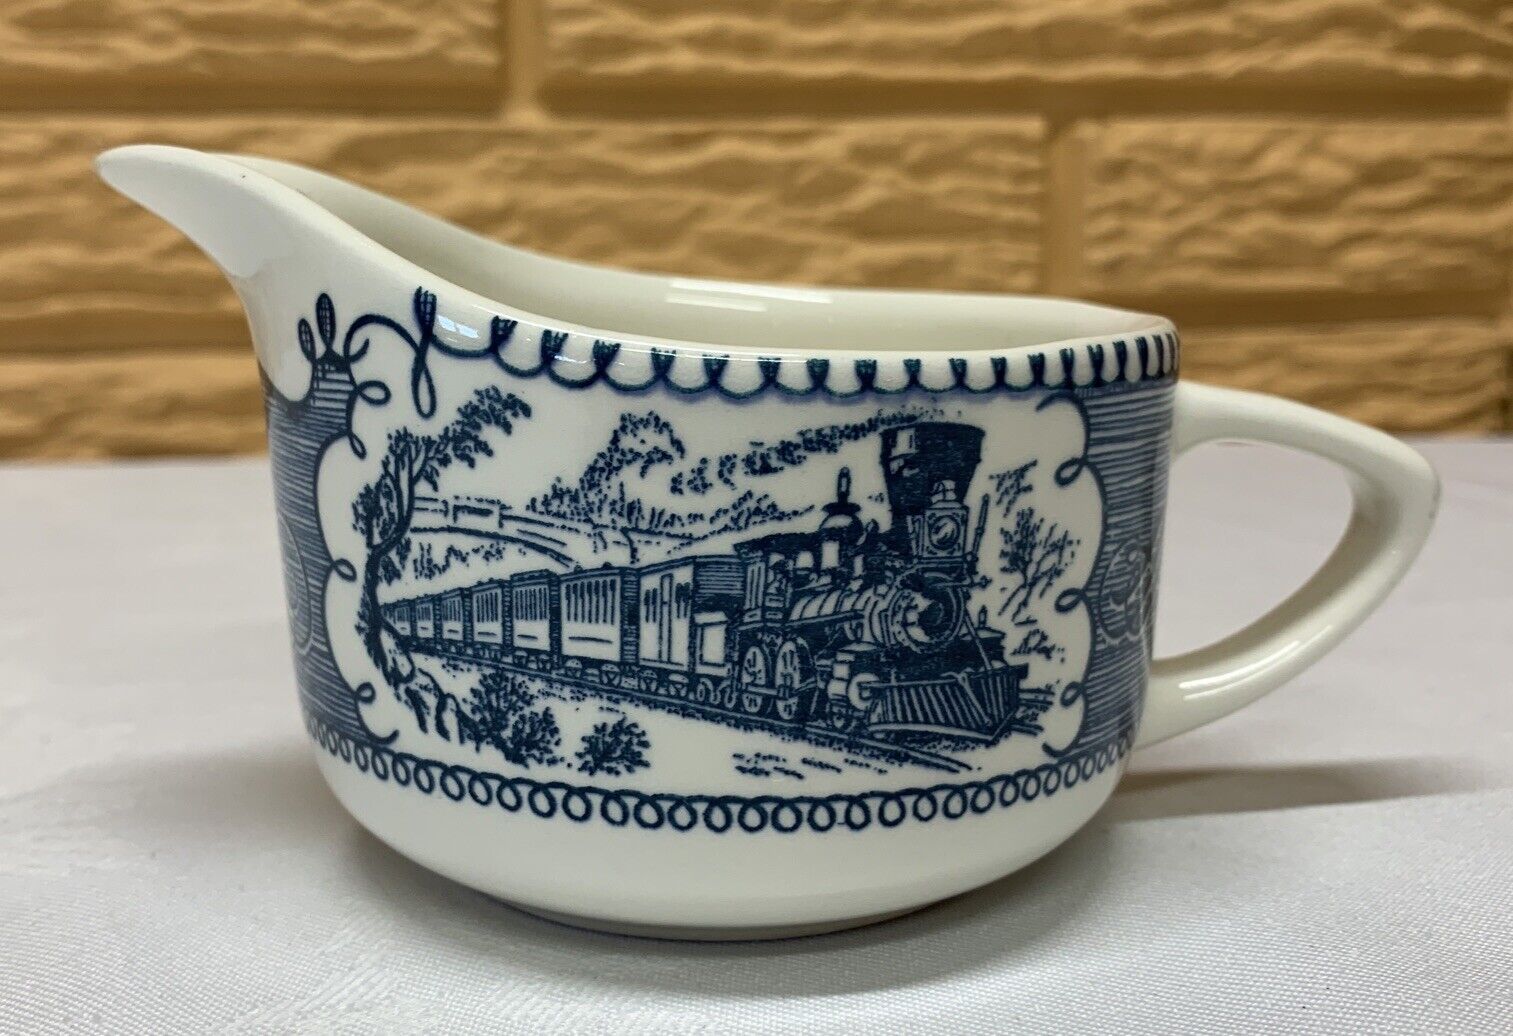 Vintage Blue and White Currier & Ives Creamer with Train Locomotive Design EUC